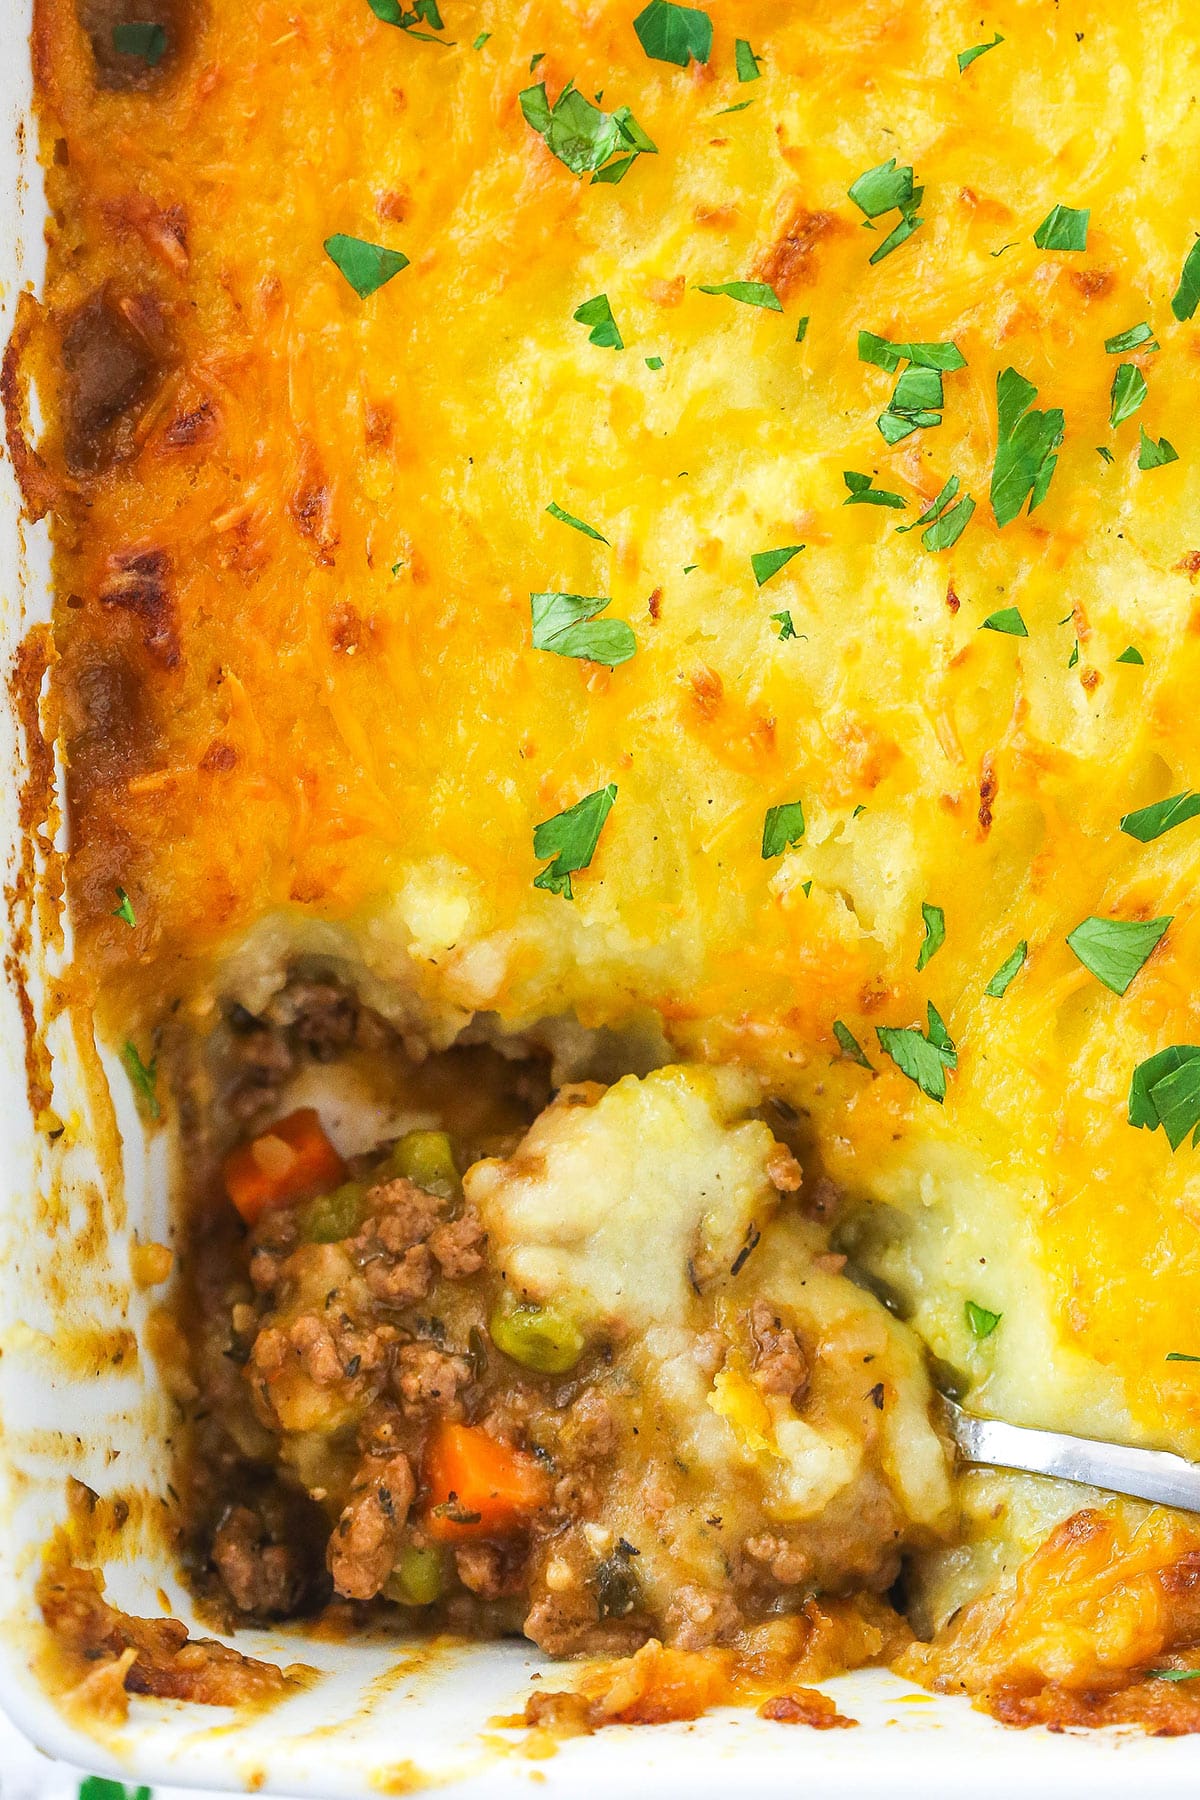 Shepherd's pie in a baking dish with a slice taken out of it.